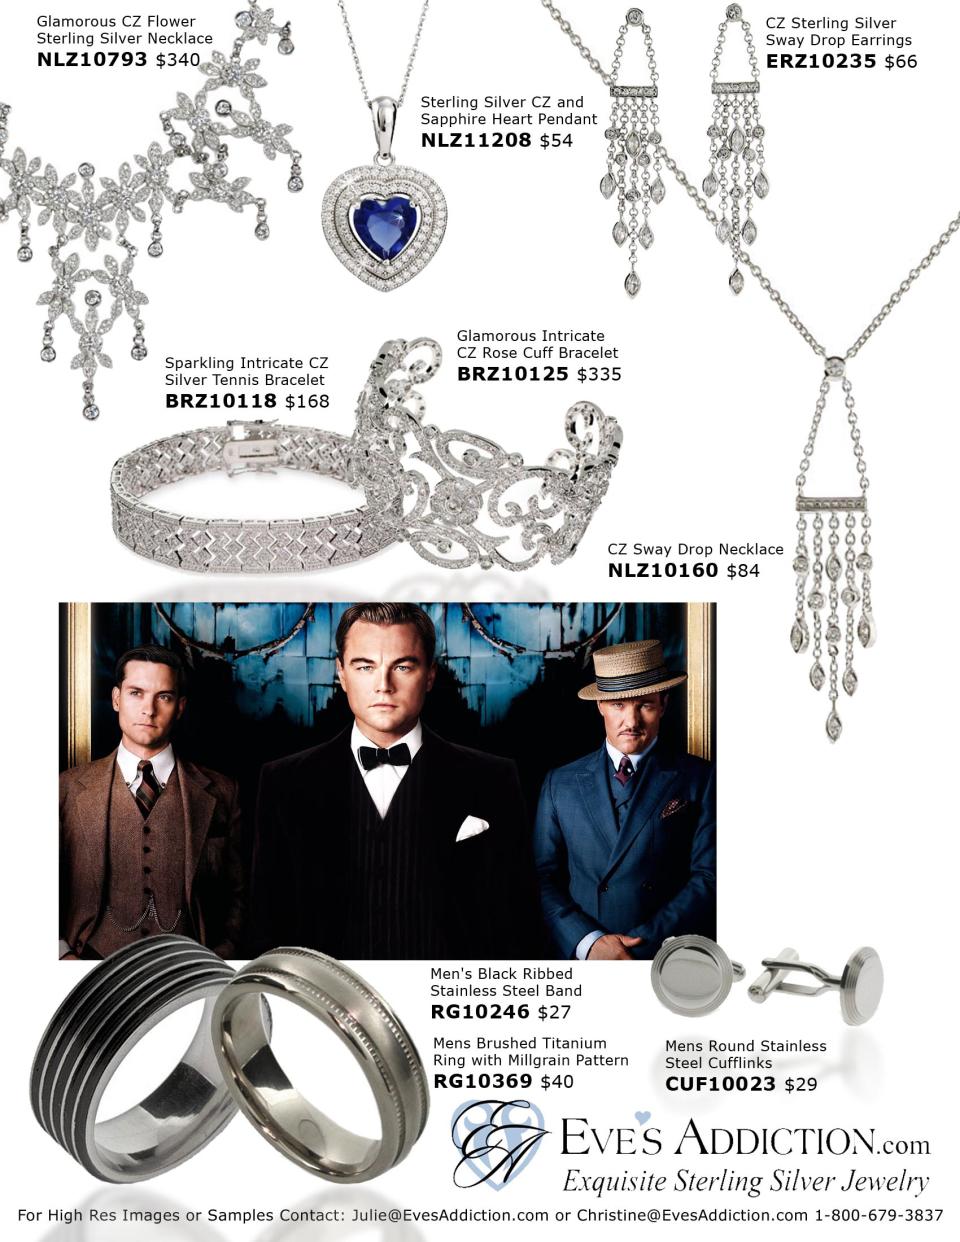 This image provided by Eves Addiction, shows jewelery inspired by Baz Luhrmann's big screen adaption of “The Great Gatsby”. The film is shining a spotlight on Roaring Twenties glam fashions, from drop-waist dresses and head scarves to crisp bow ties and spectator shoes. (AP Photo/Eves Addiction)